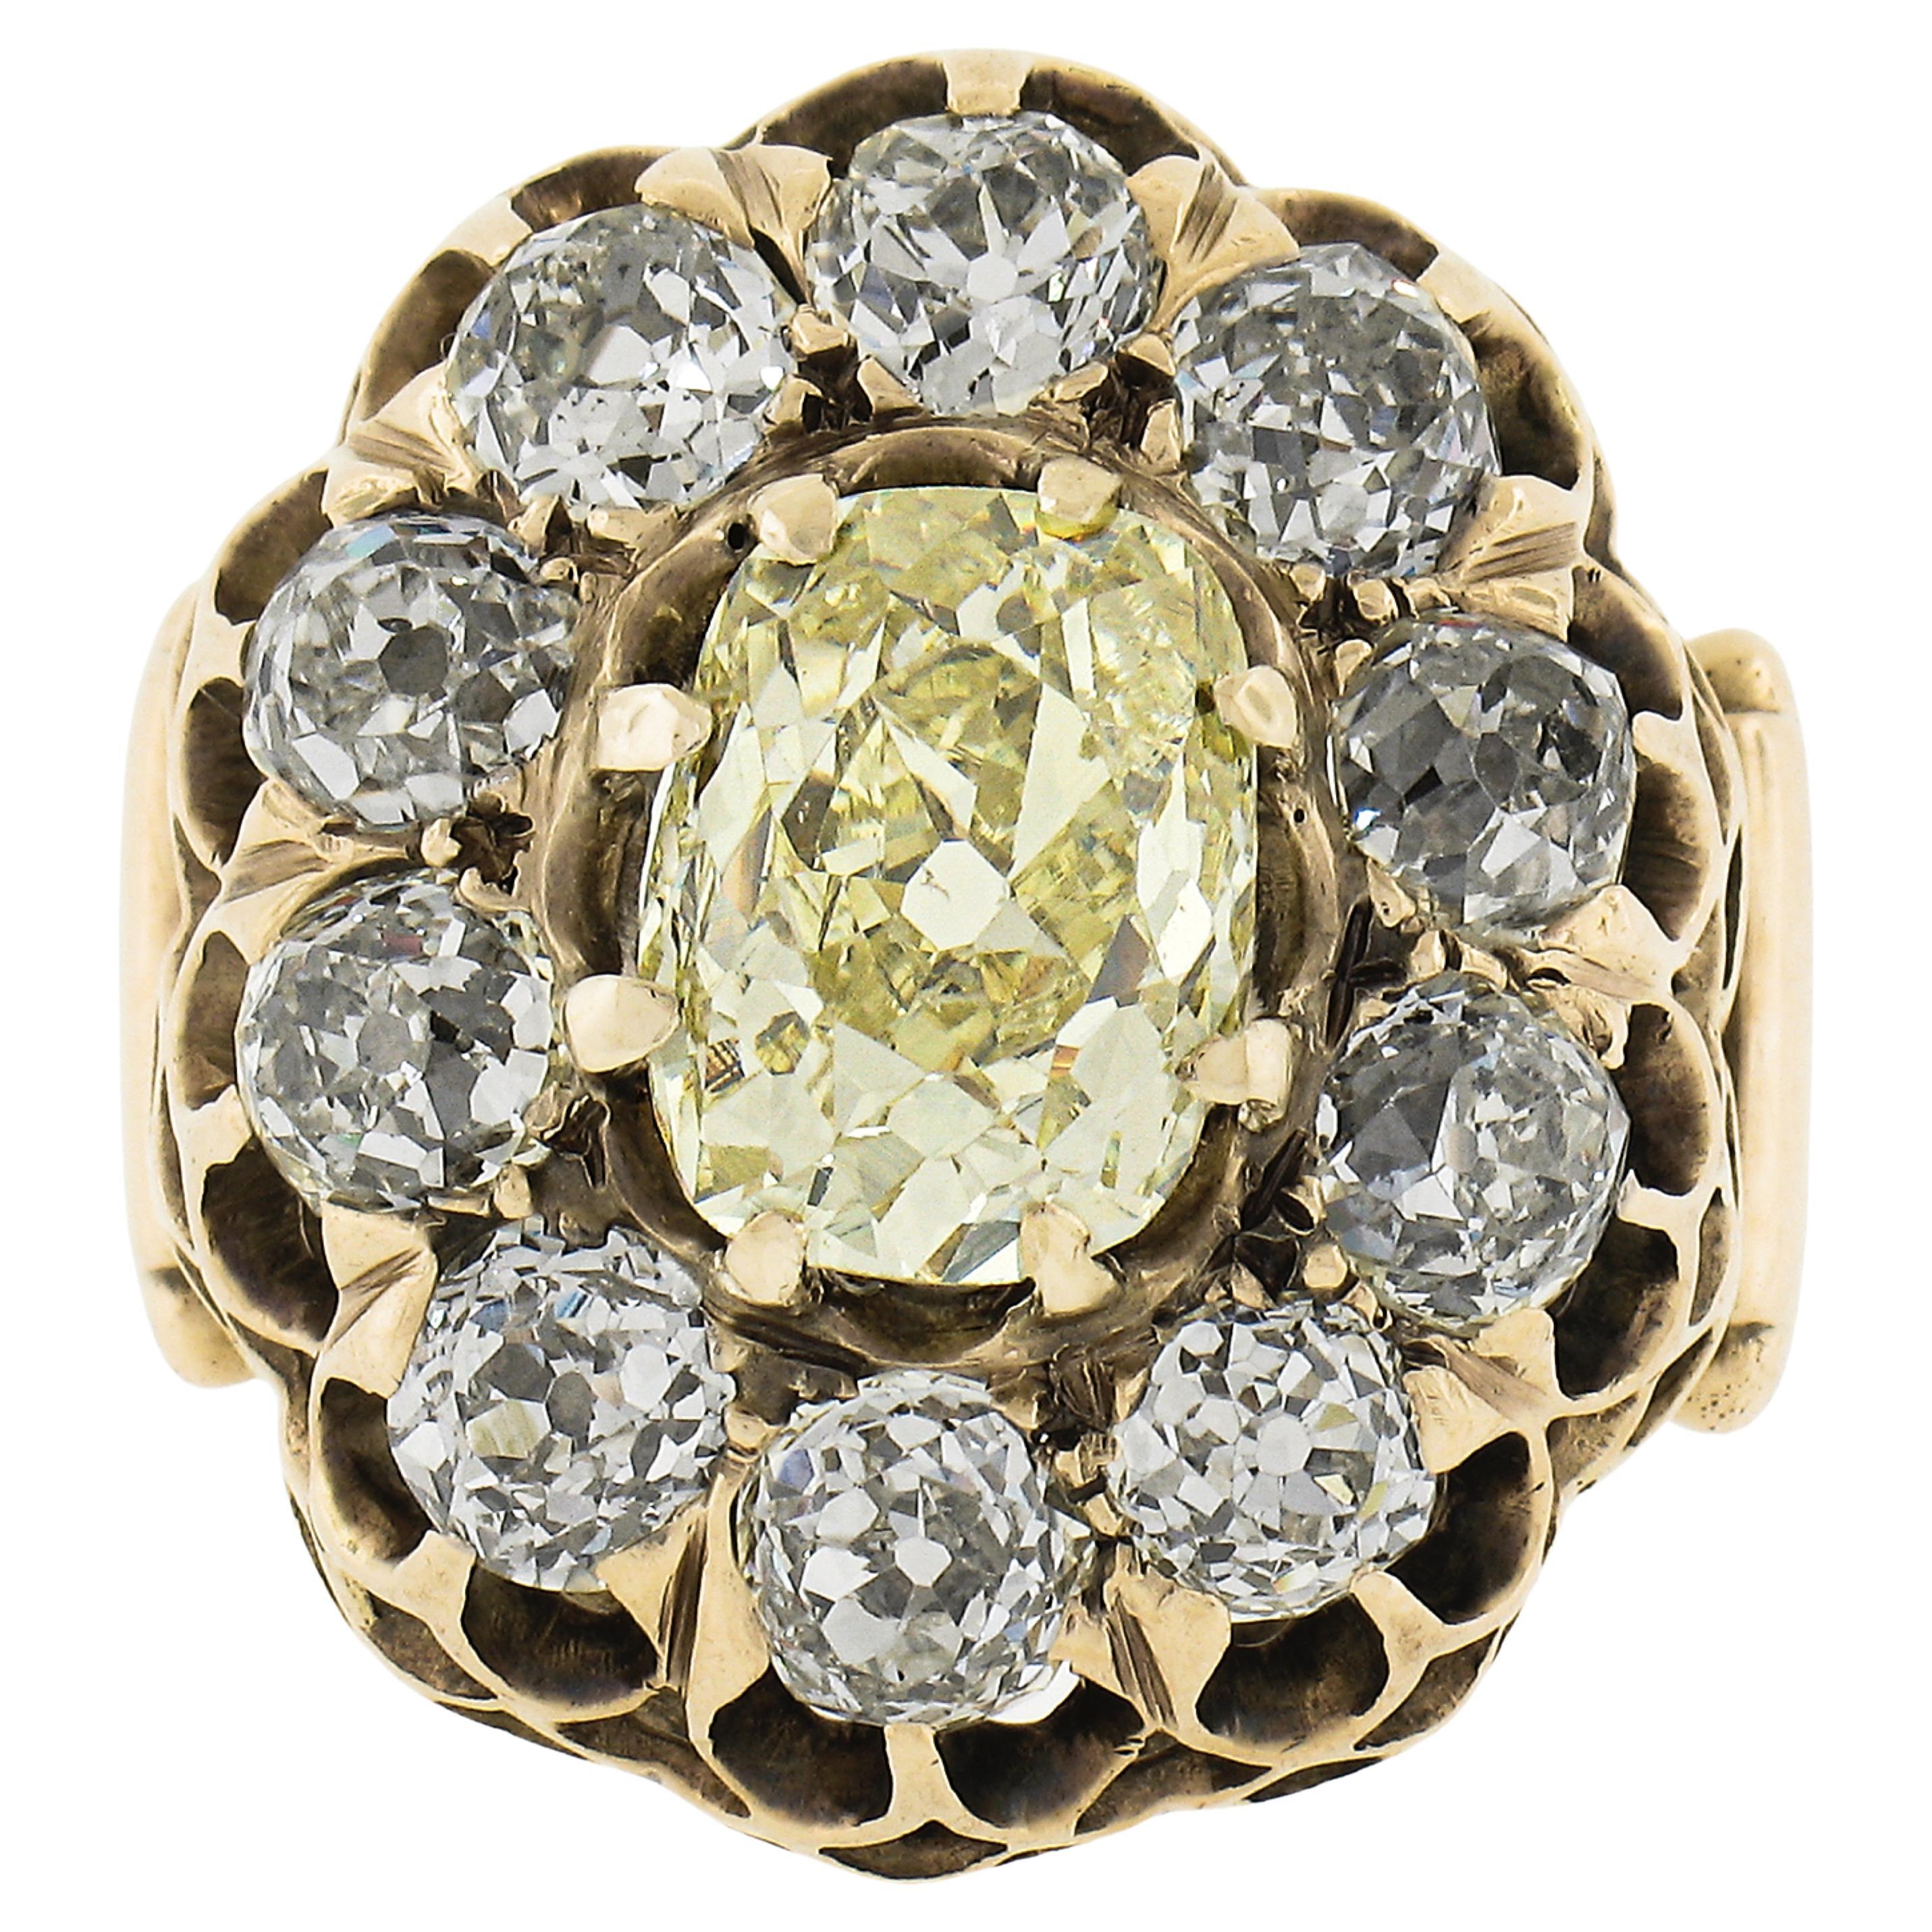 Antique Victorian 14K Gold 6.49ct GIA Fancy Intense Yellow Old Diamond Halo Ring For Sale